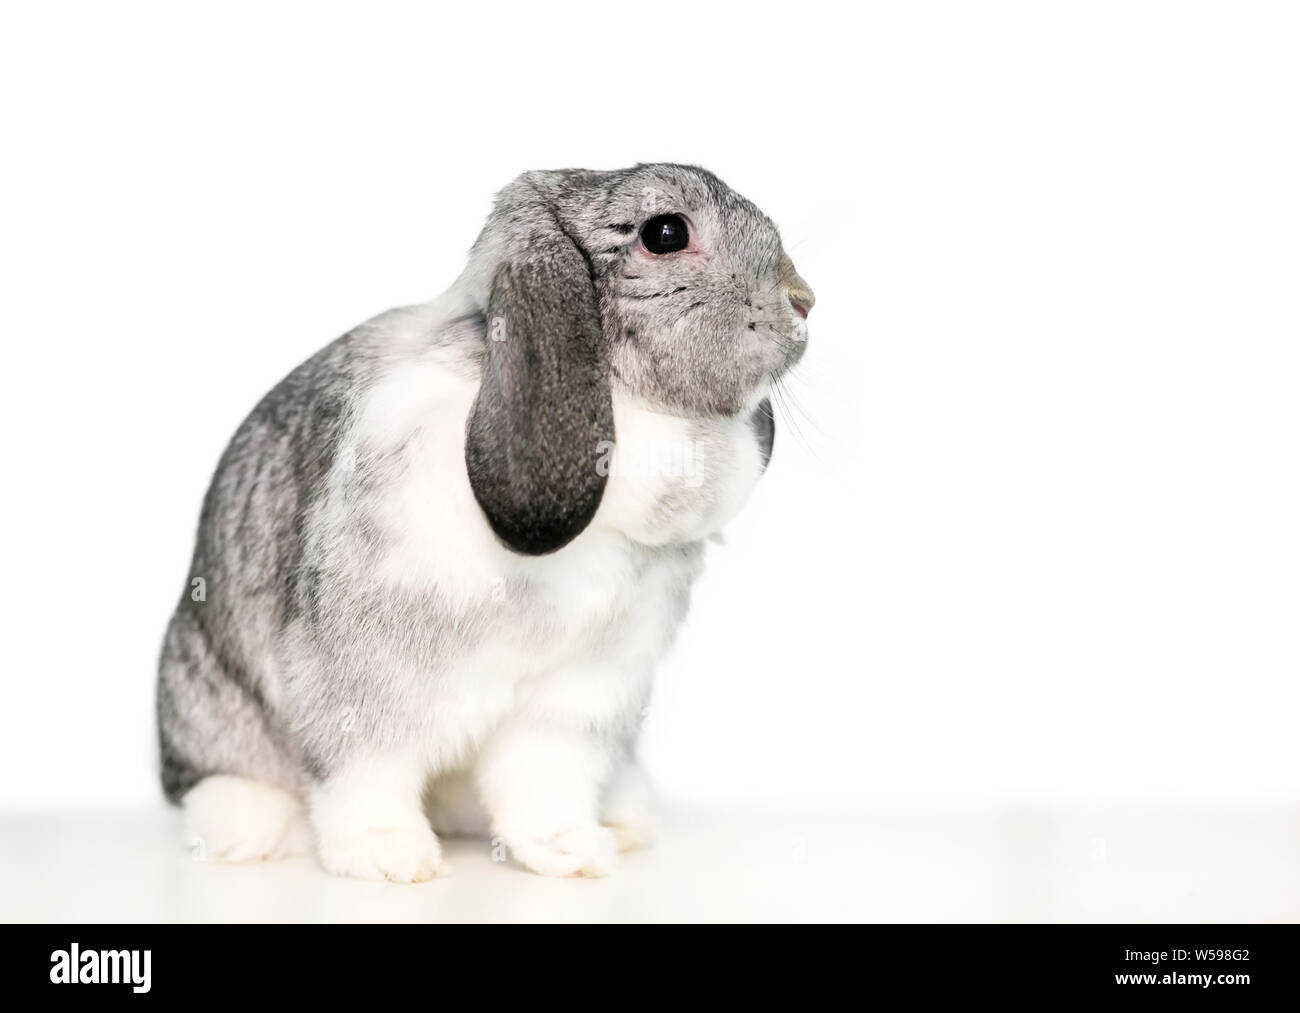 A cute gray and white lop eared domestic pet rabbit on a white background Stock Photo